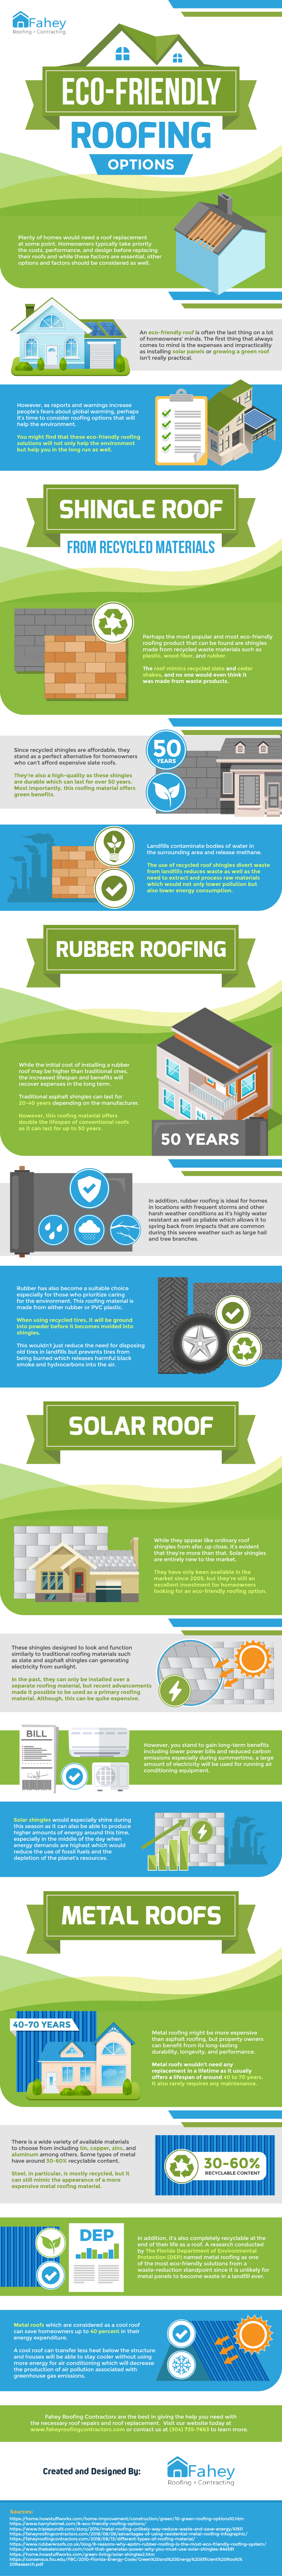 Roofing Infographic